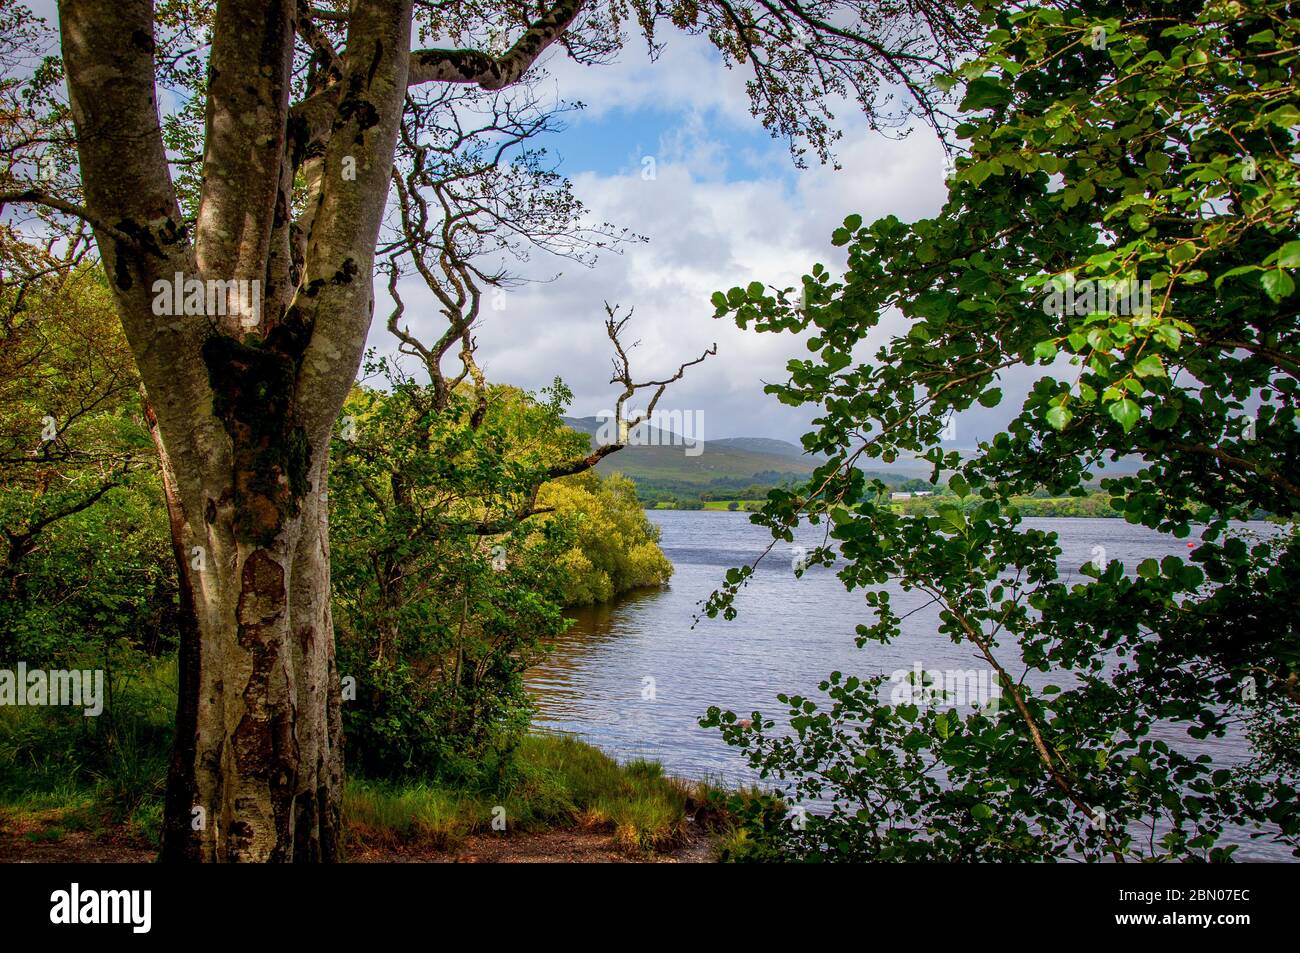 View of Gartan Lough, County Donegal, Ireland through trees in summer. Stock Photo